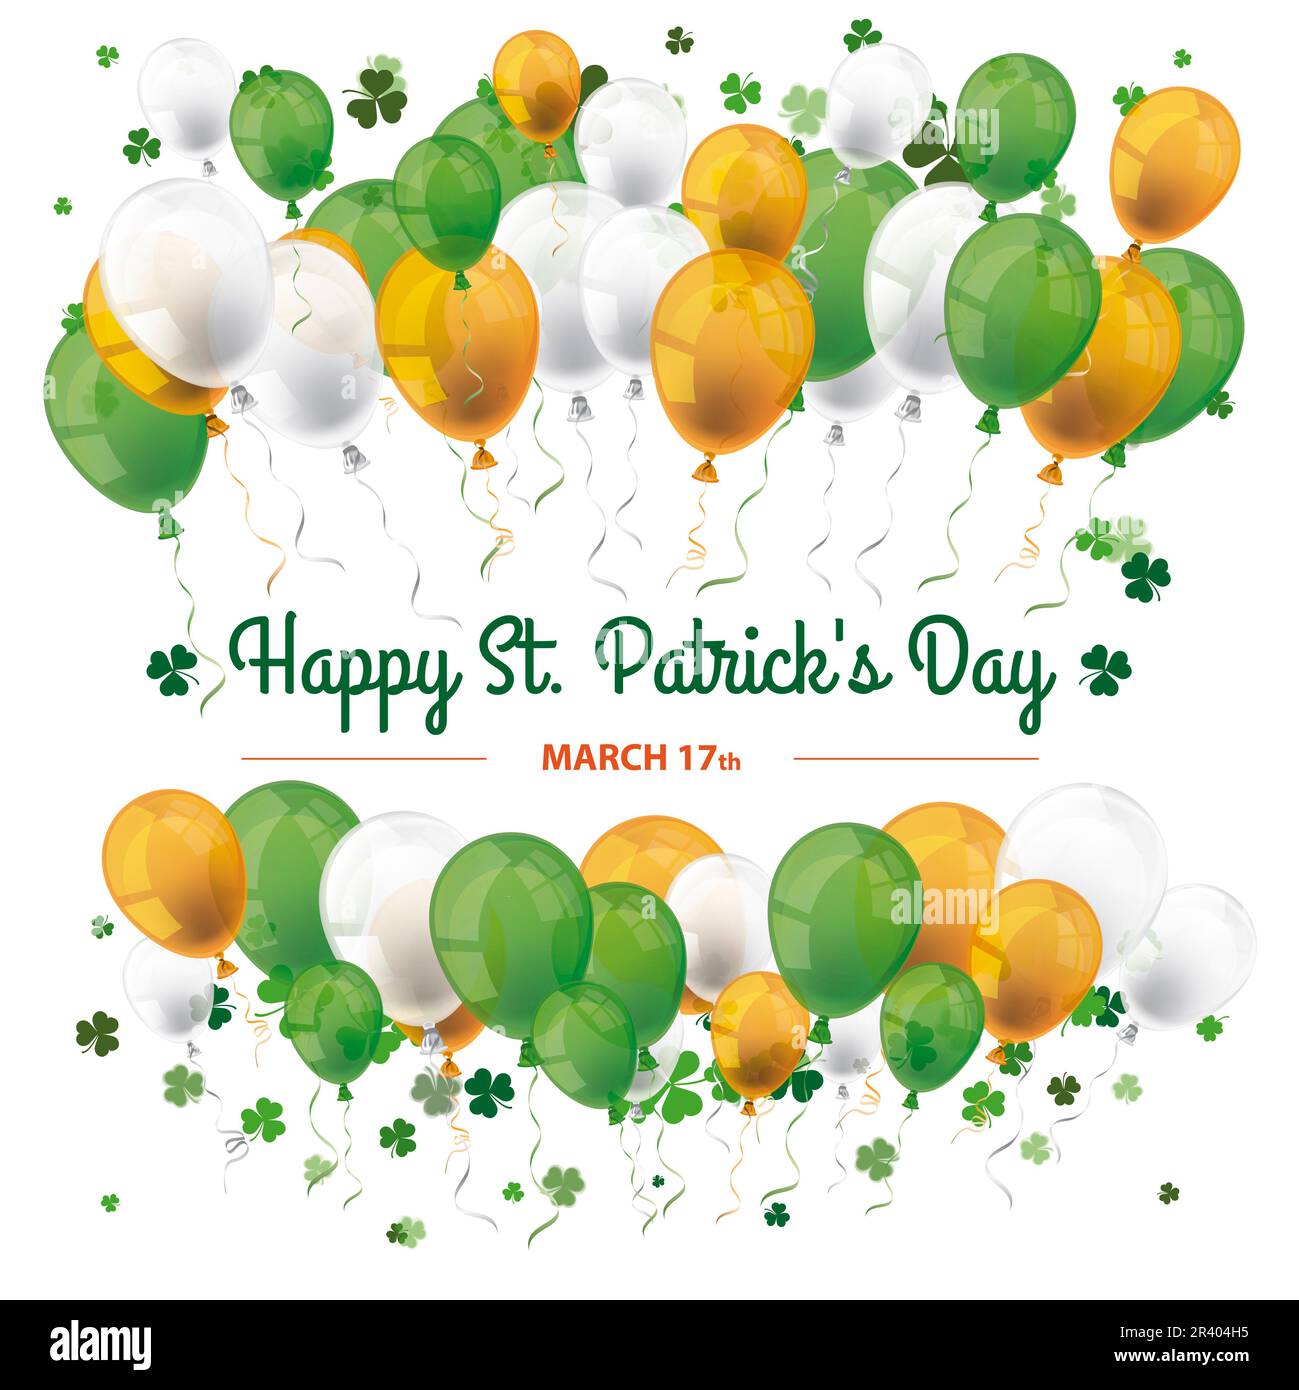 St. Patrick's Day White Cover Balloons Shamrocks Banque D'Images